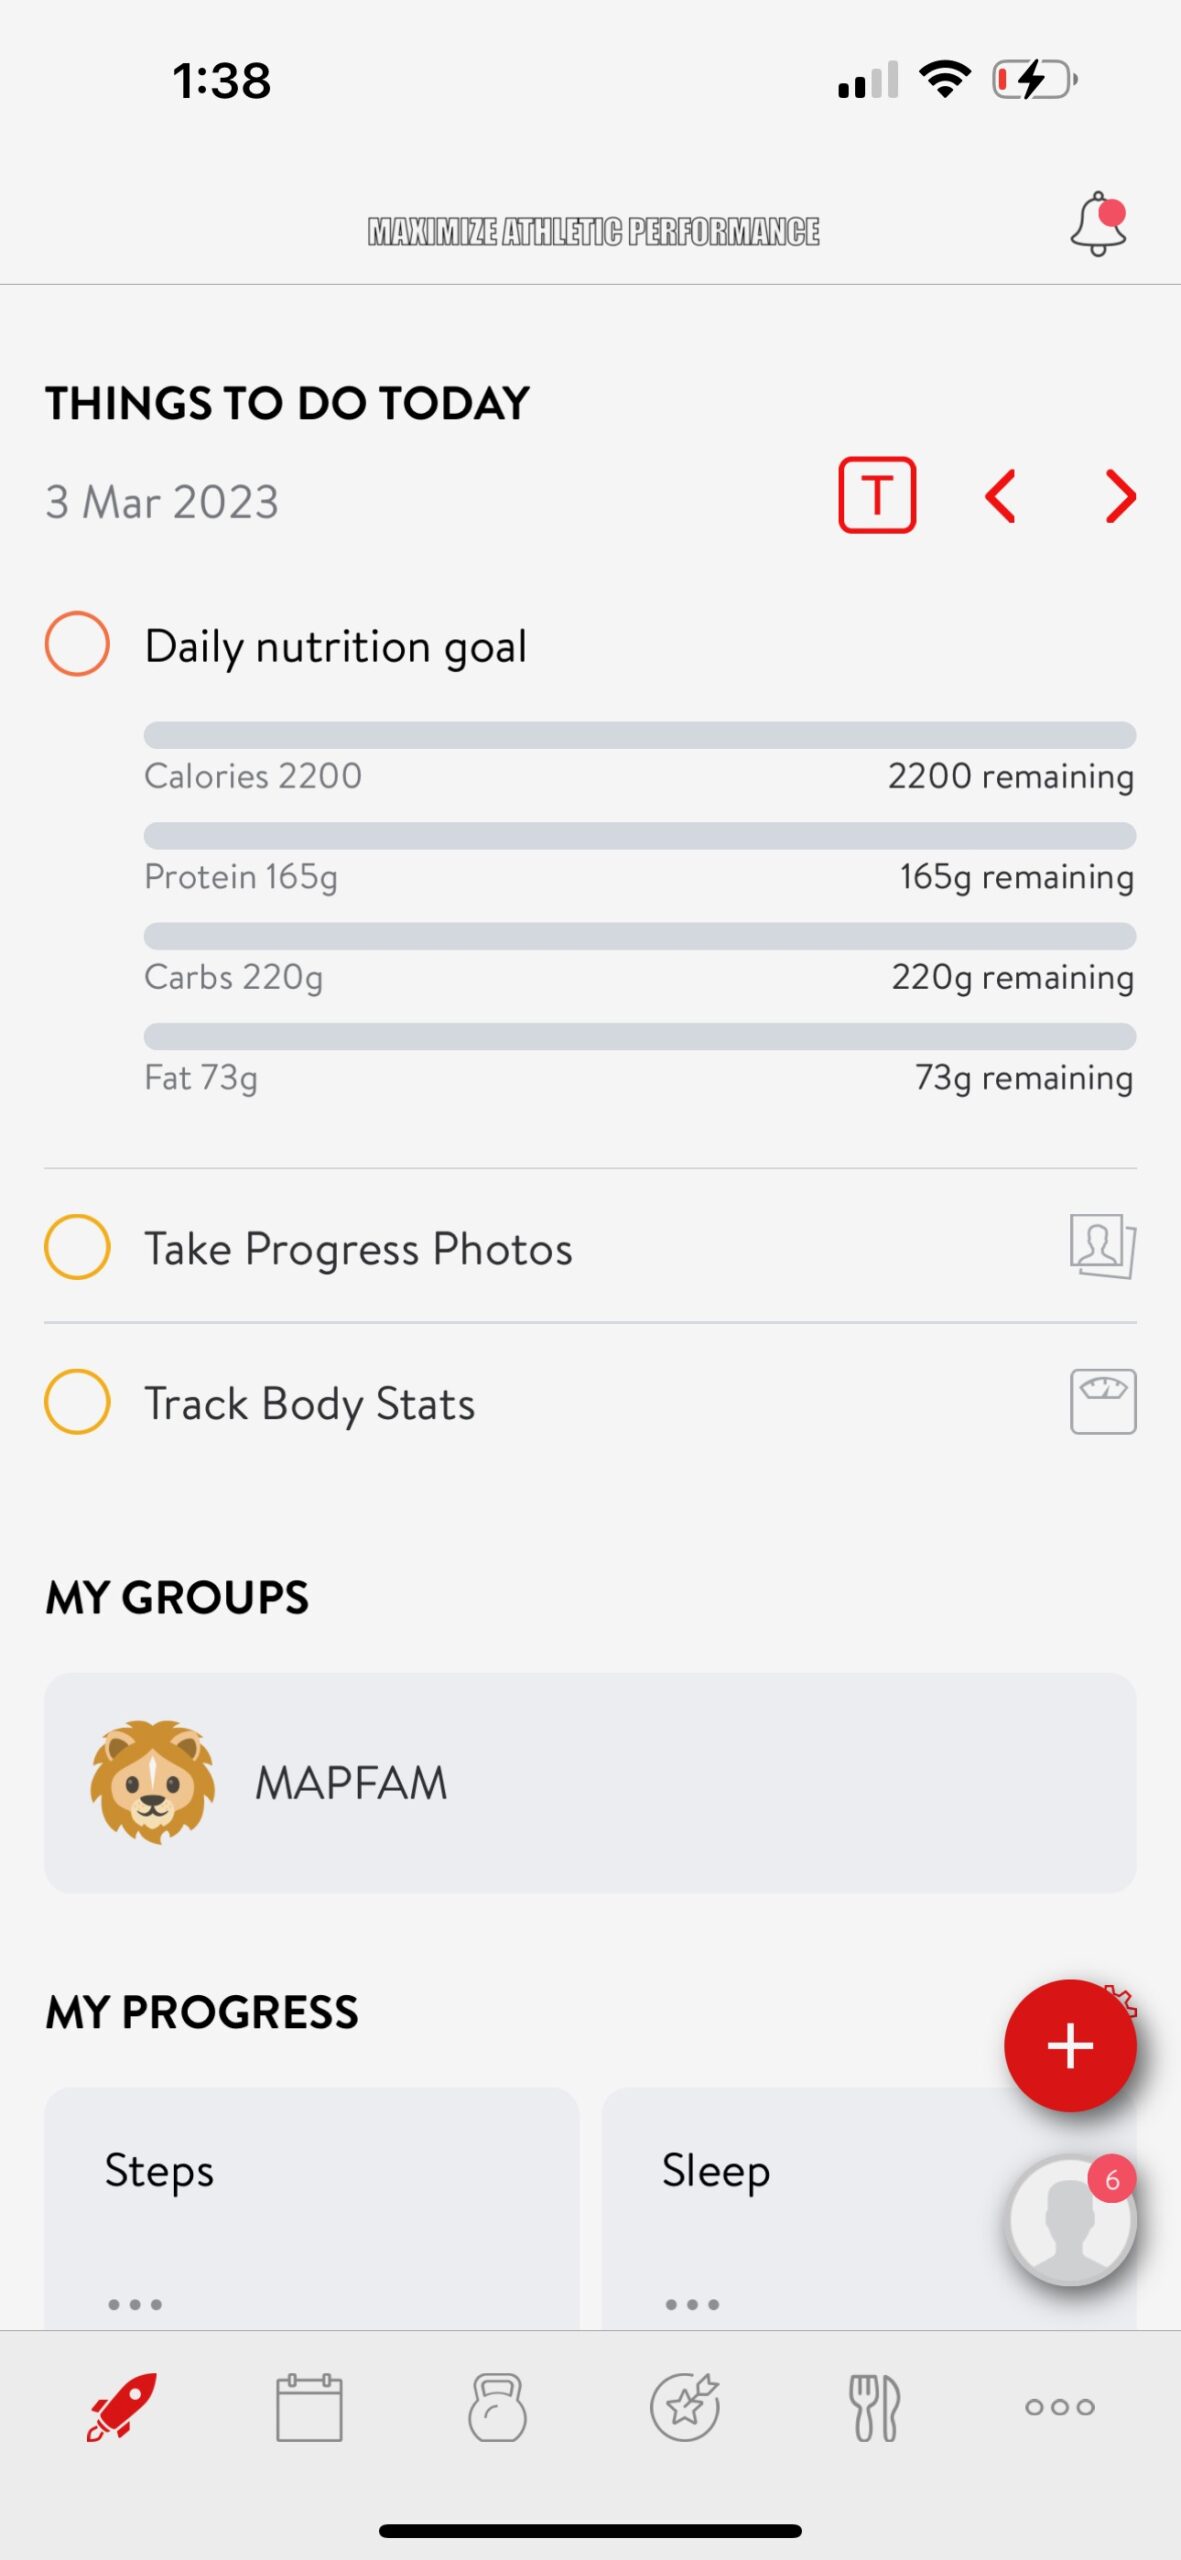 State of the Art App To Track Progress